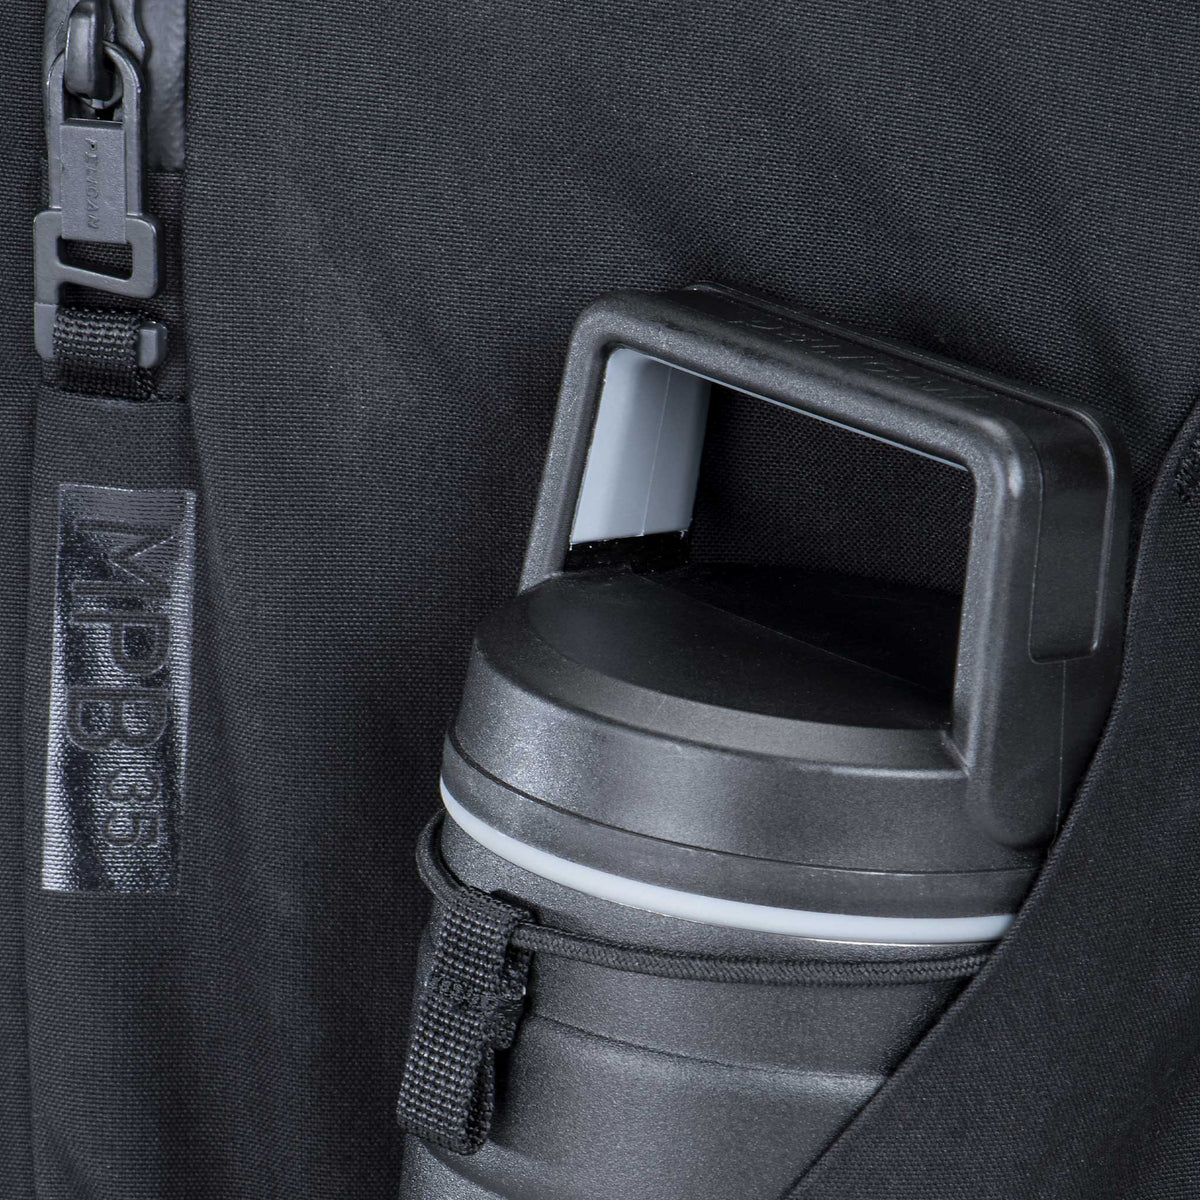 Pelican™ MPB35 Backpack side pocket can hold an 18oz Pelican bottle